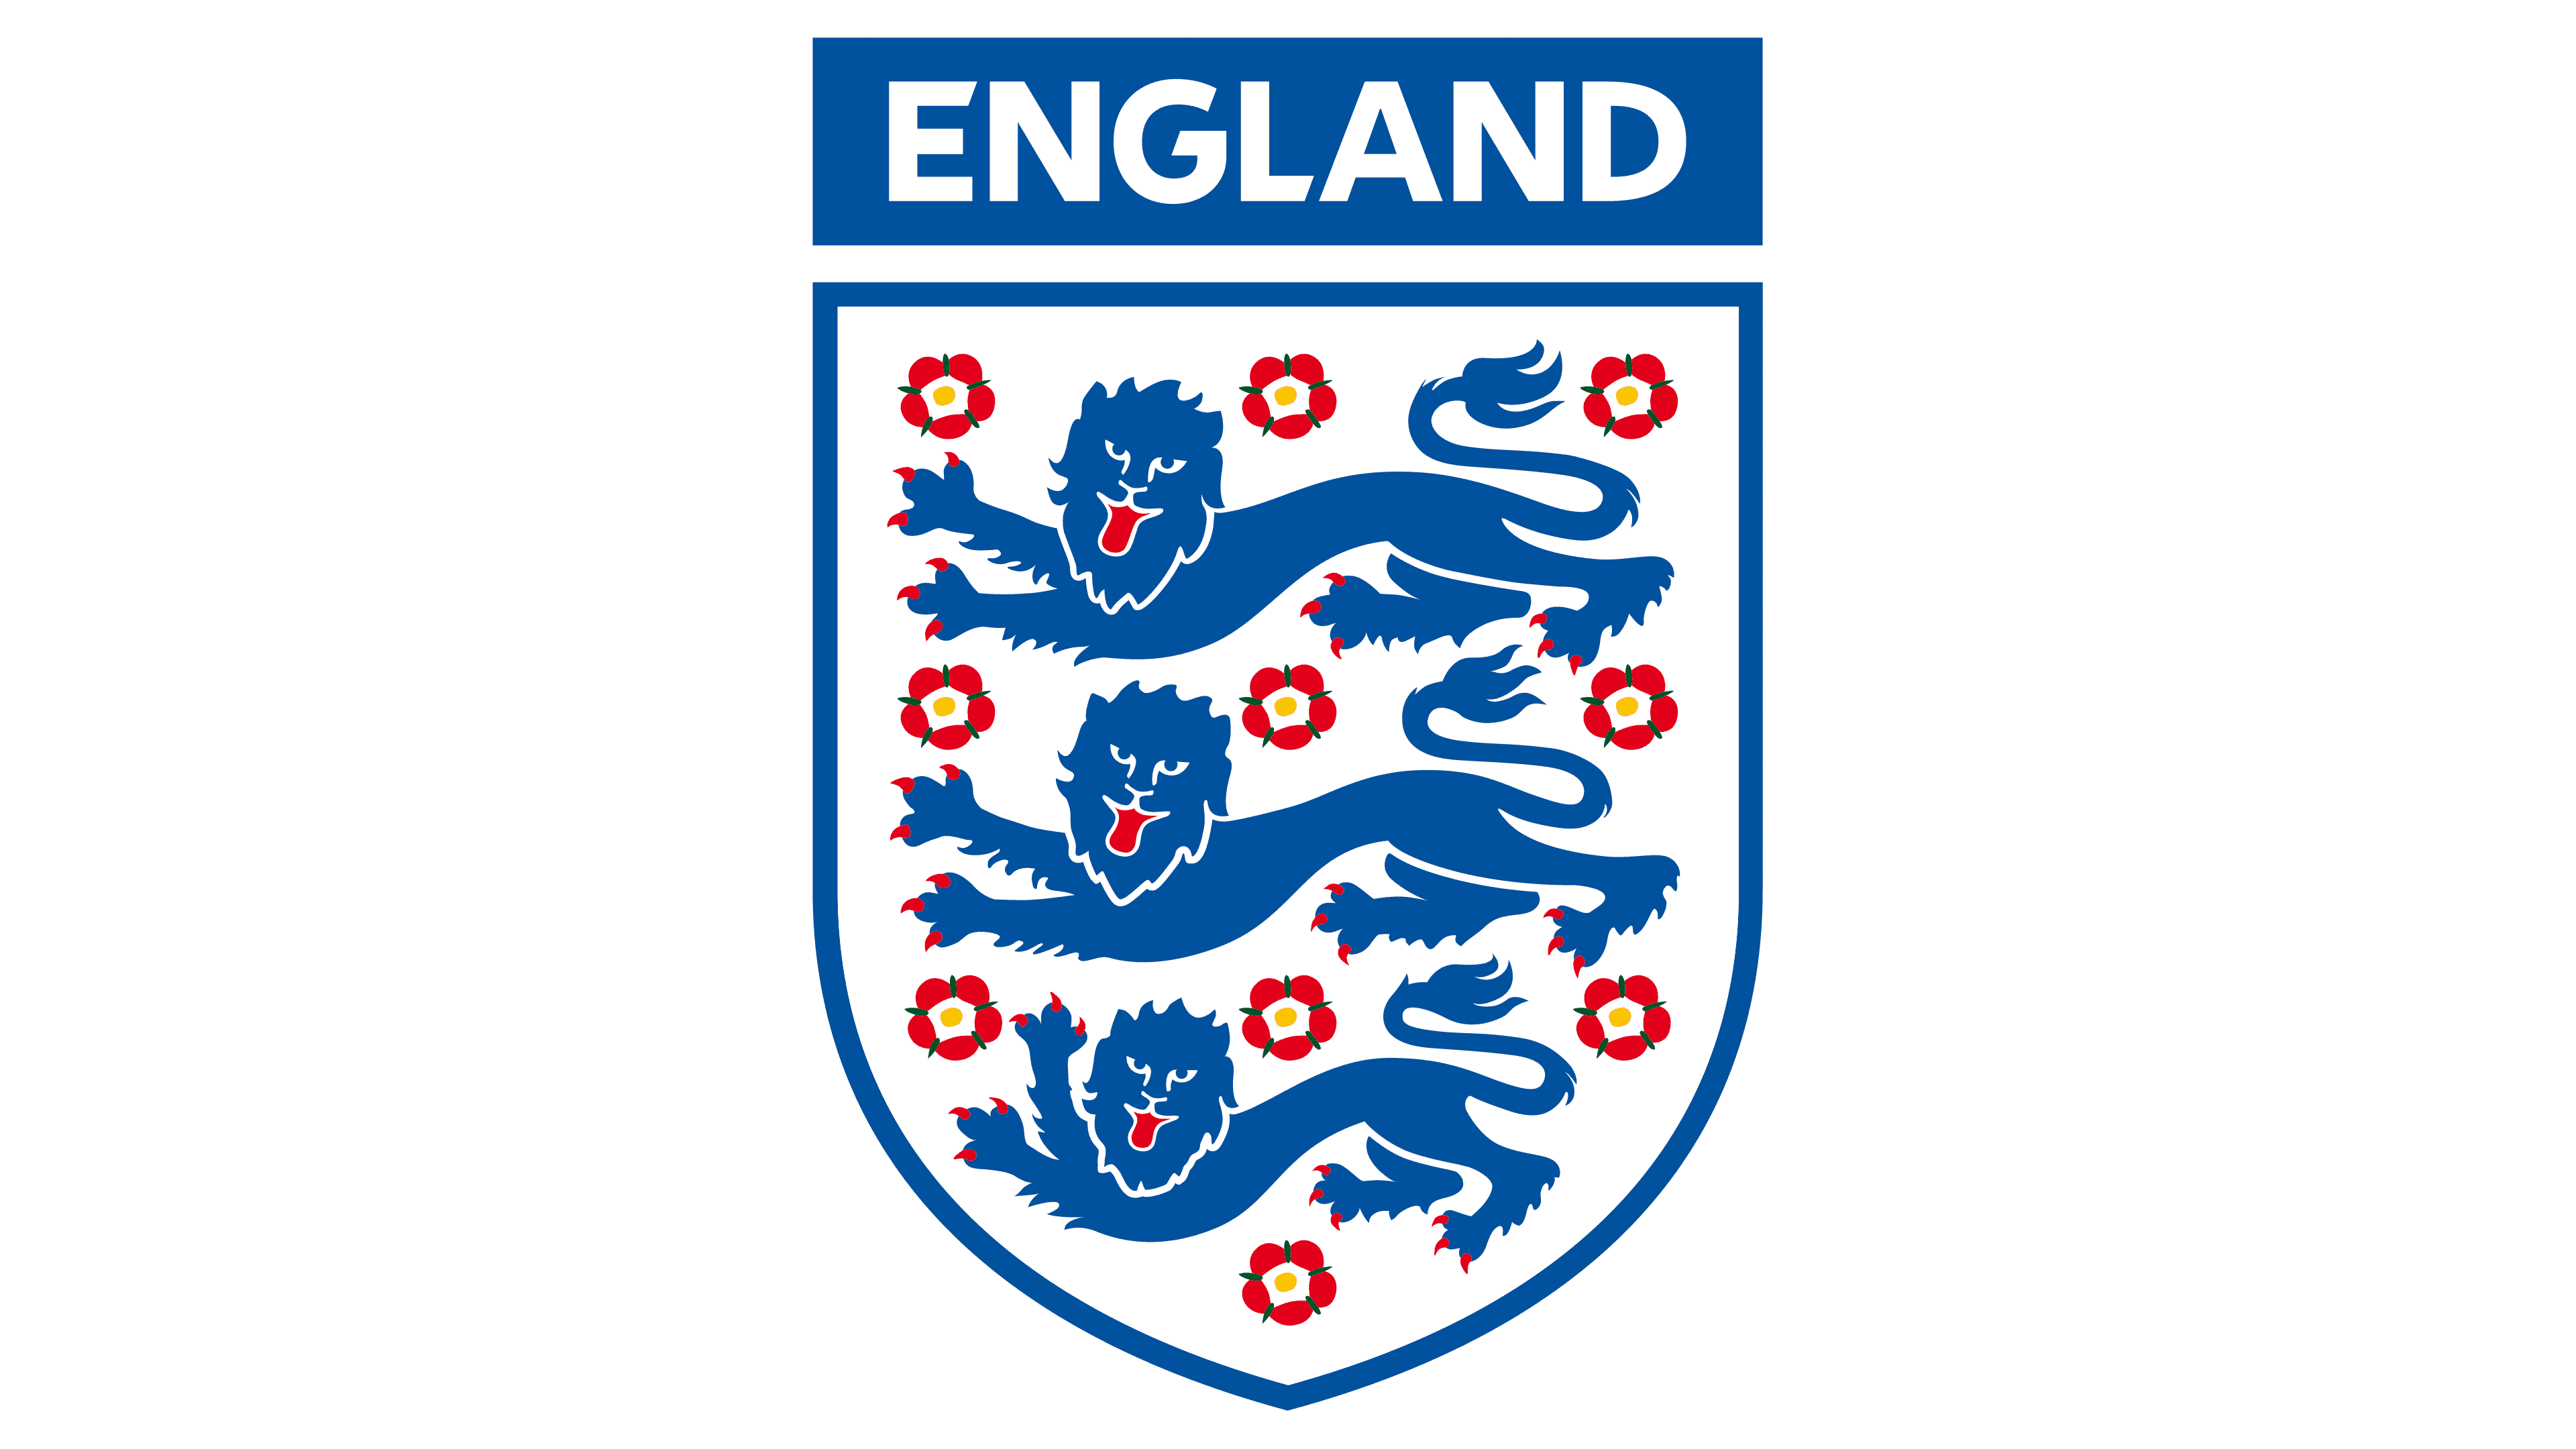 All set as England likely to reserve some top stars Gareth Southgate may lose match if plans goes through